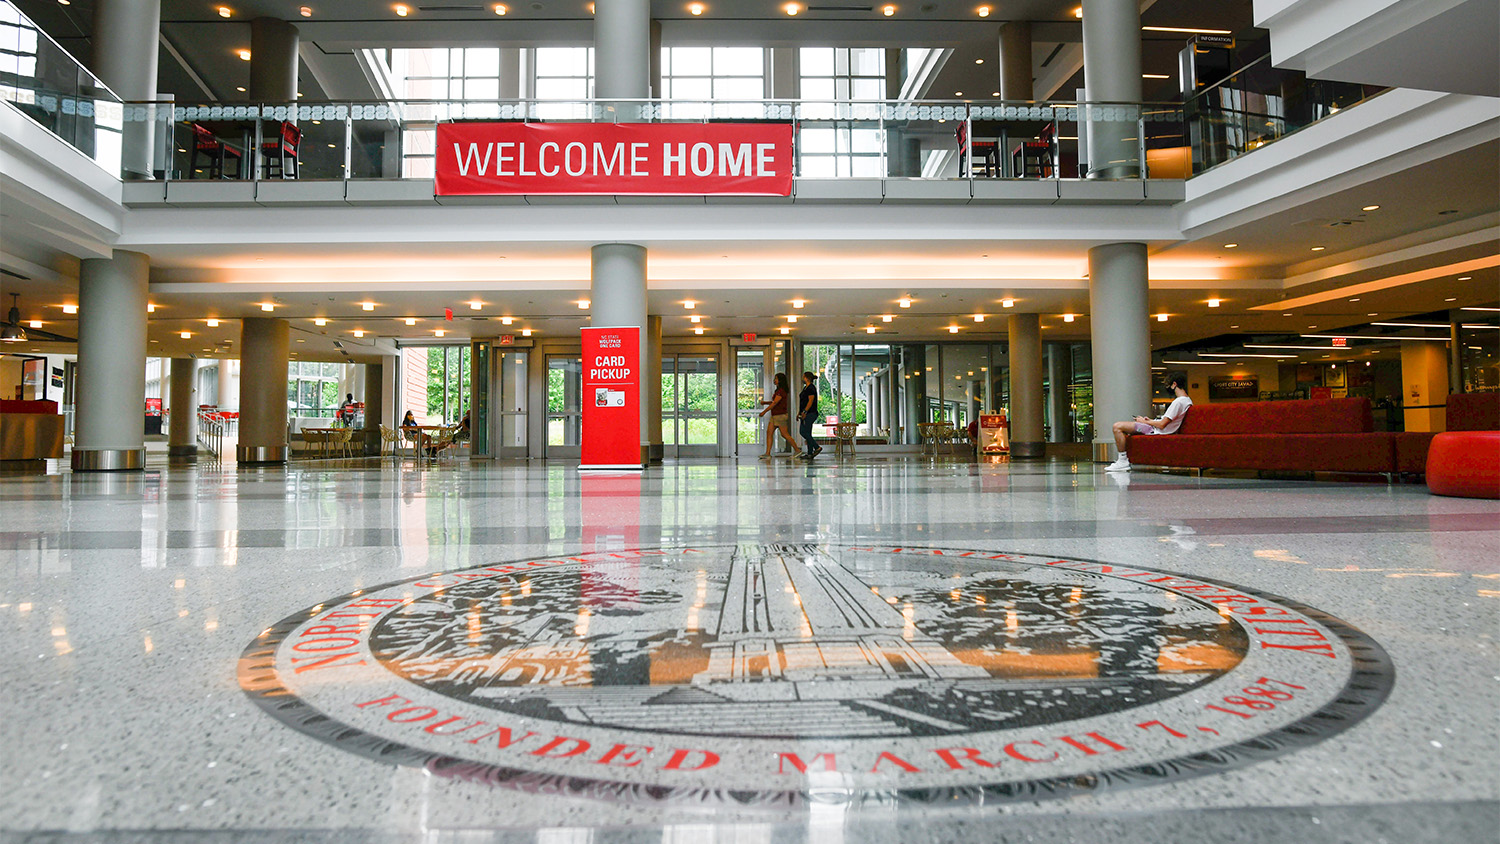 The NC State seal on the floor of Talley Student Union, with a large banner in the background that reads "Welcome Home."